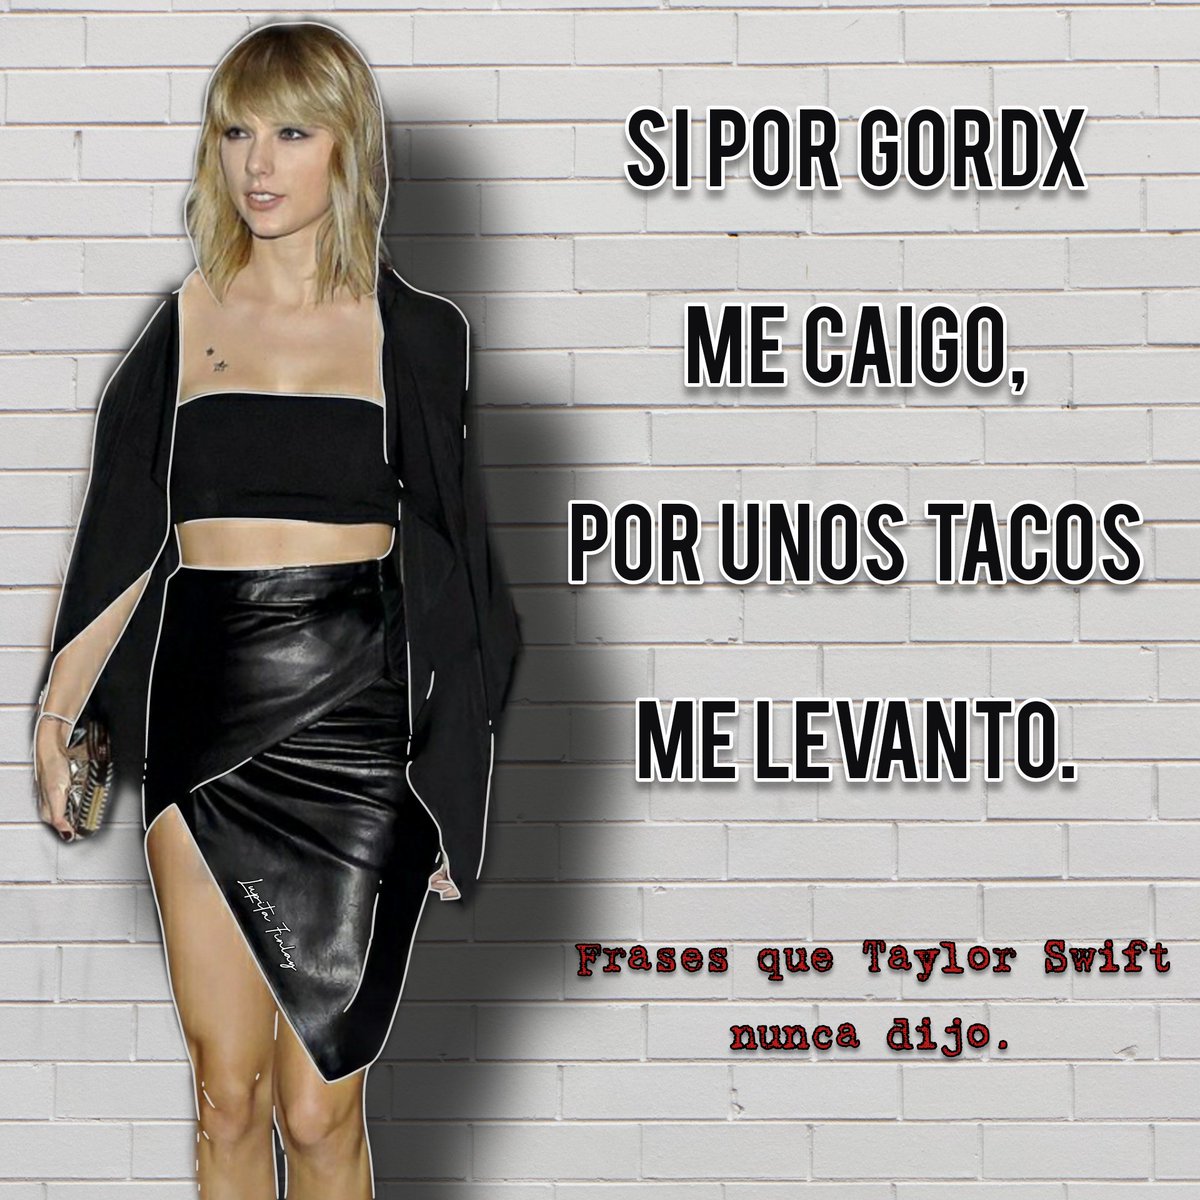 Frases que Taylor Swift nunca dijo 🤙

#TaylorSwift #taylorswiftmeme #Swiftie #taylorswiftespanol